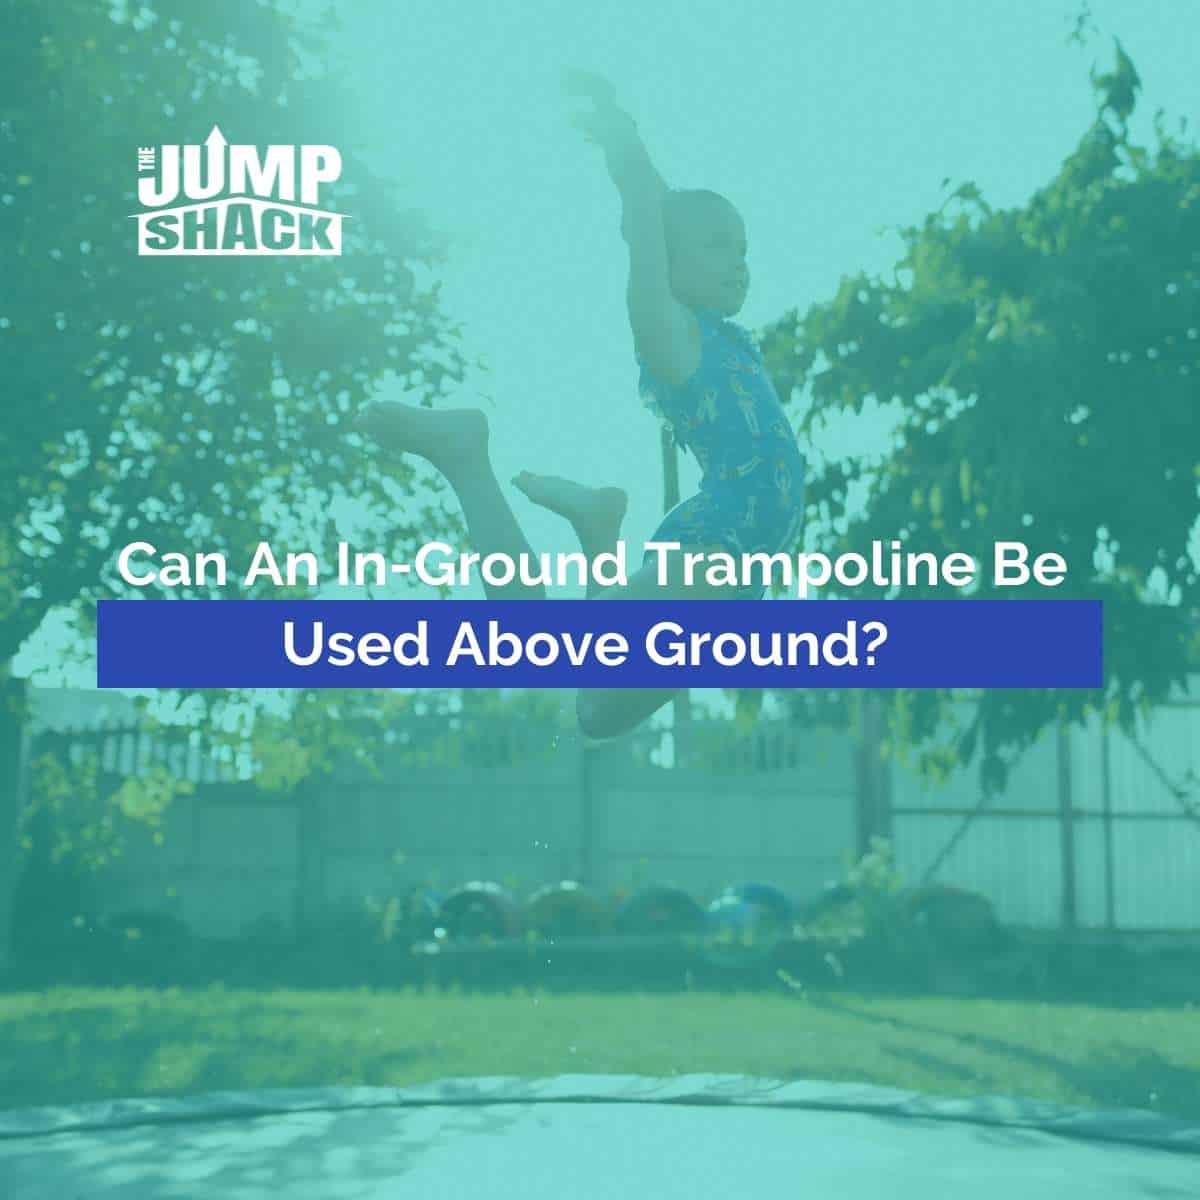 Can An In-Ground Trampoline Be Used Above Ground